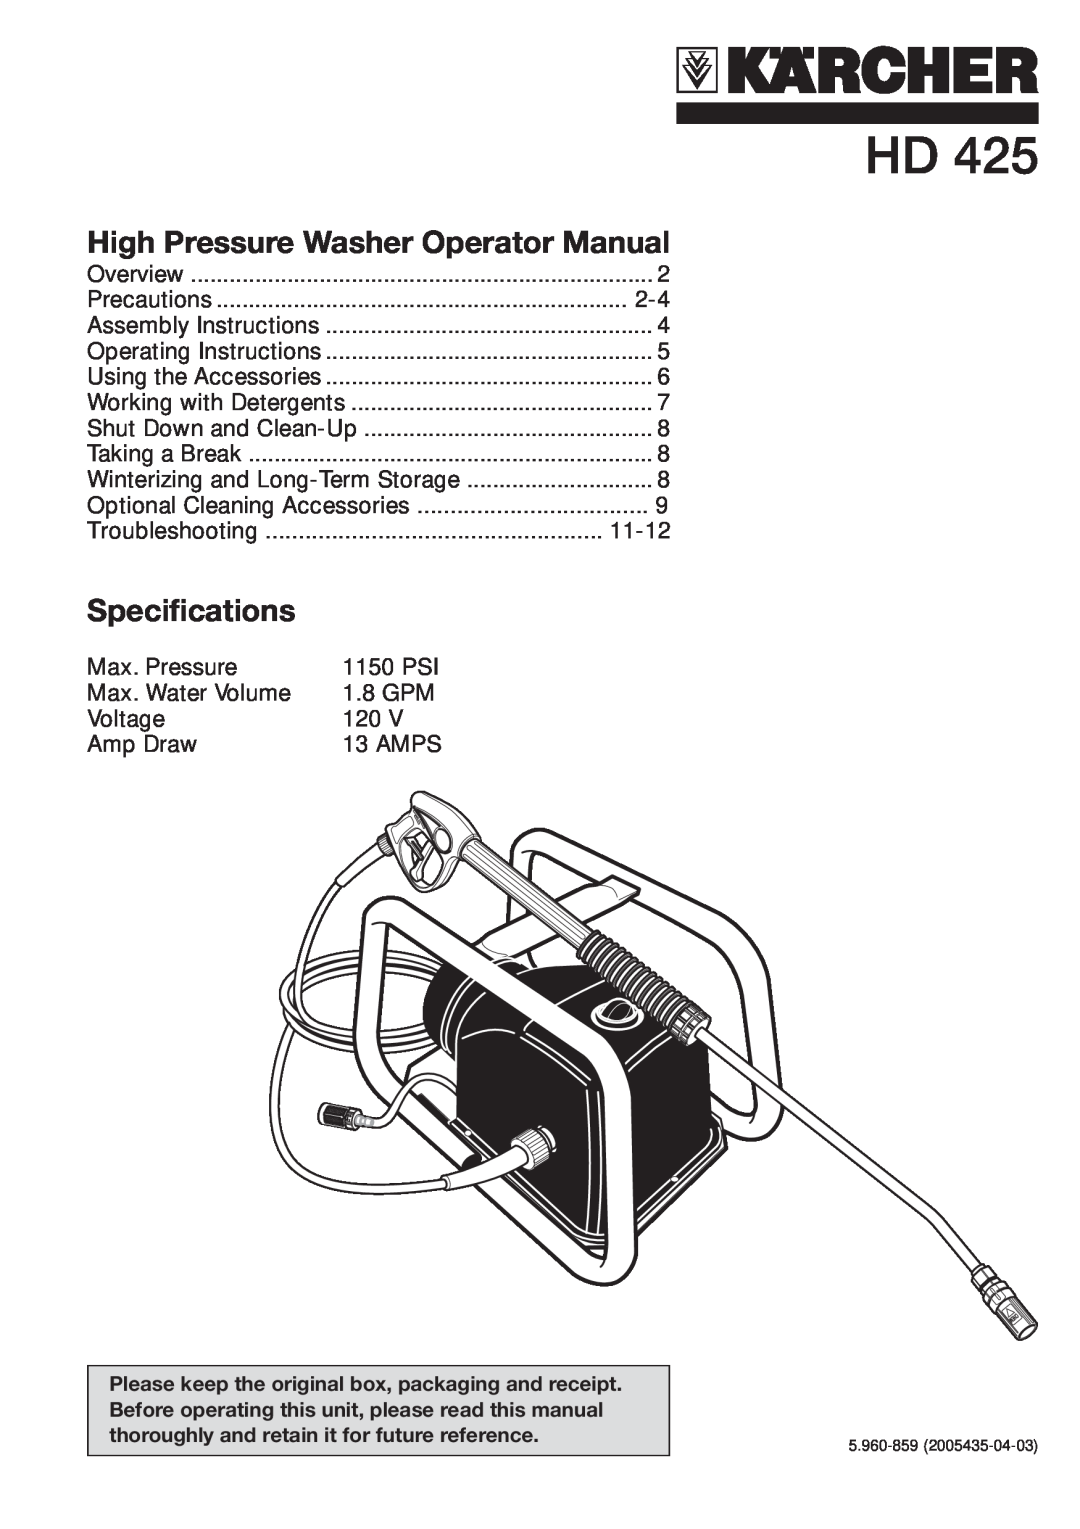 Karcher HD 425 specifications High Pressure Washer Operator Manual, Specifications 